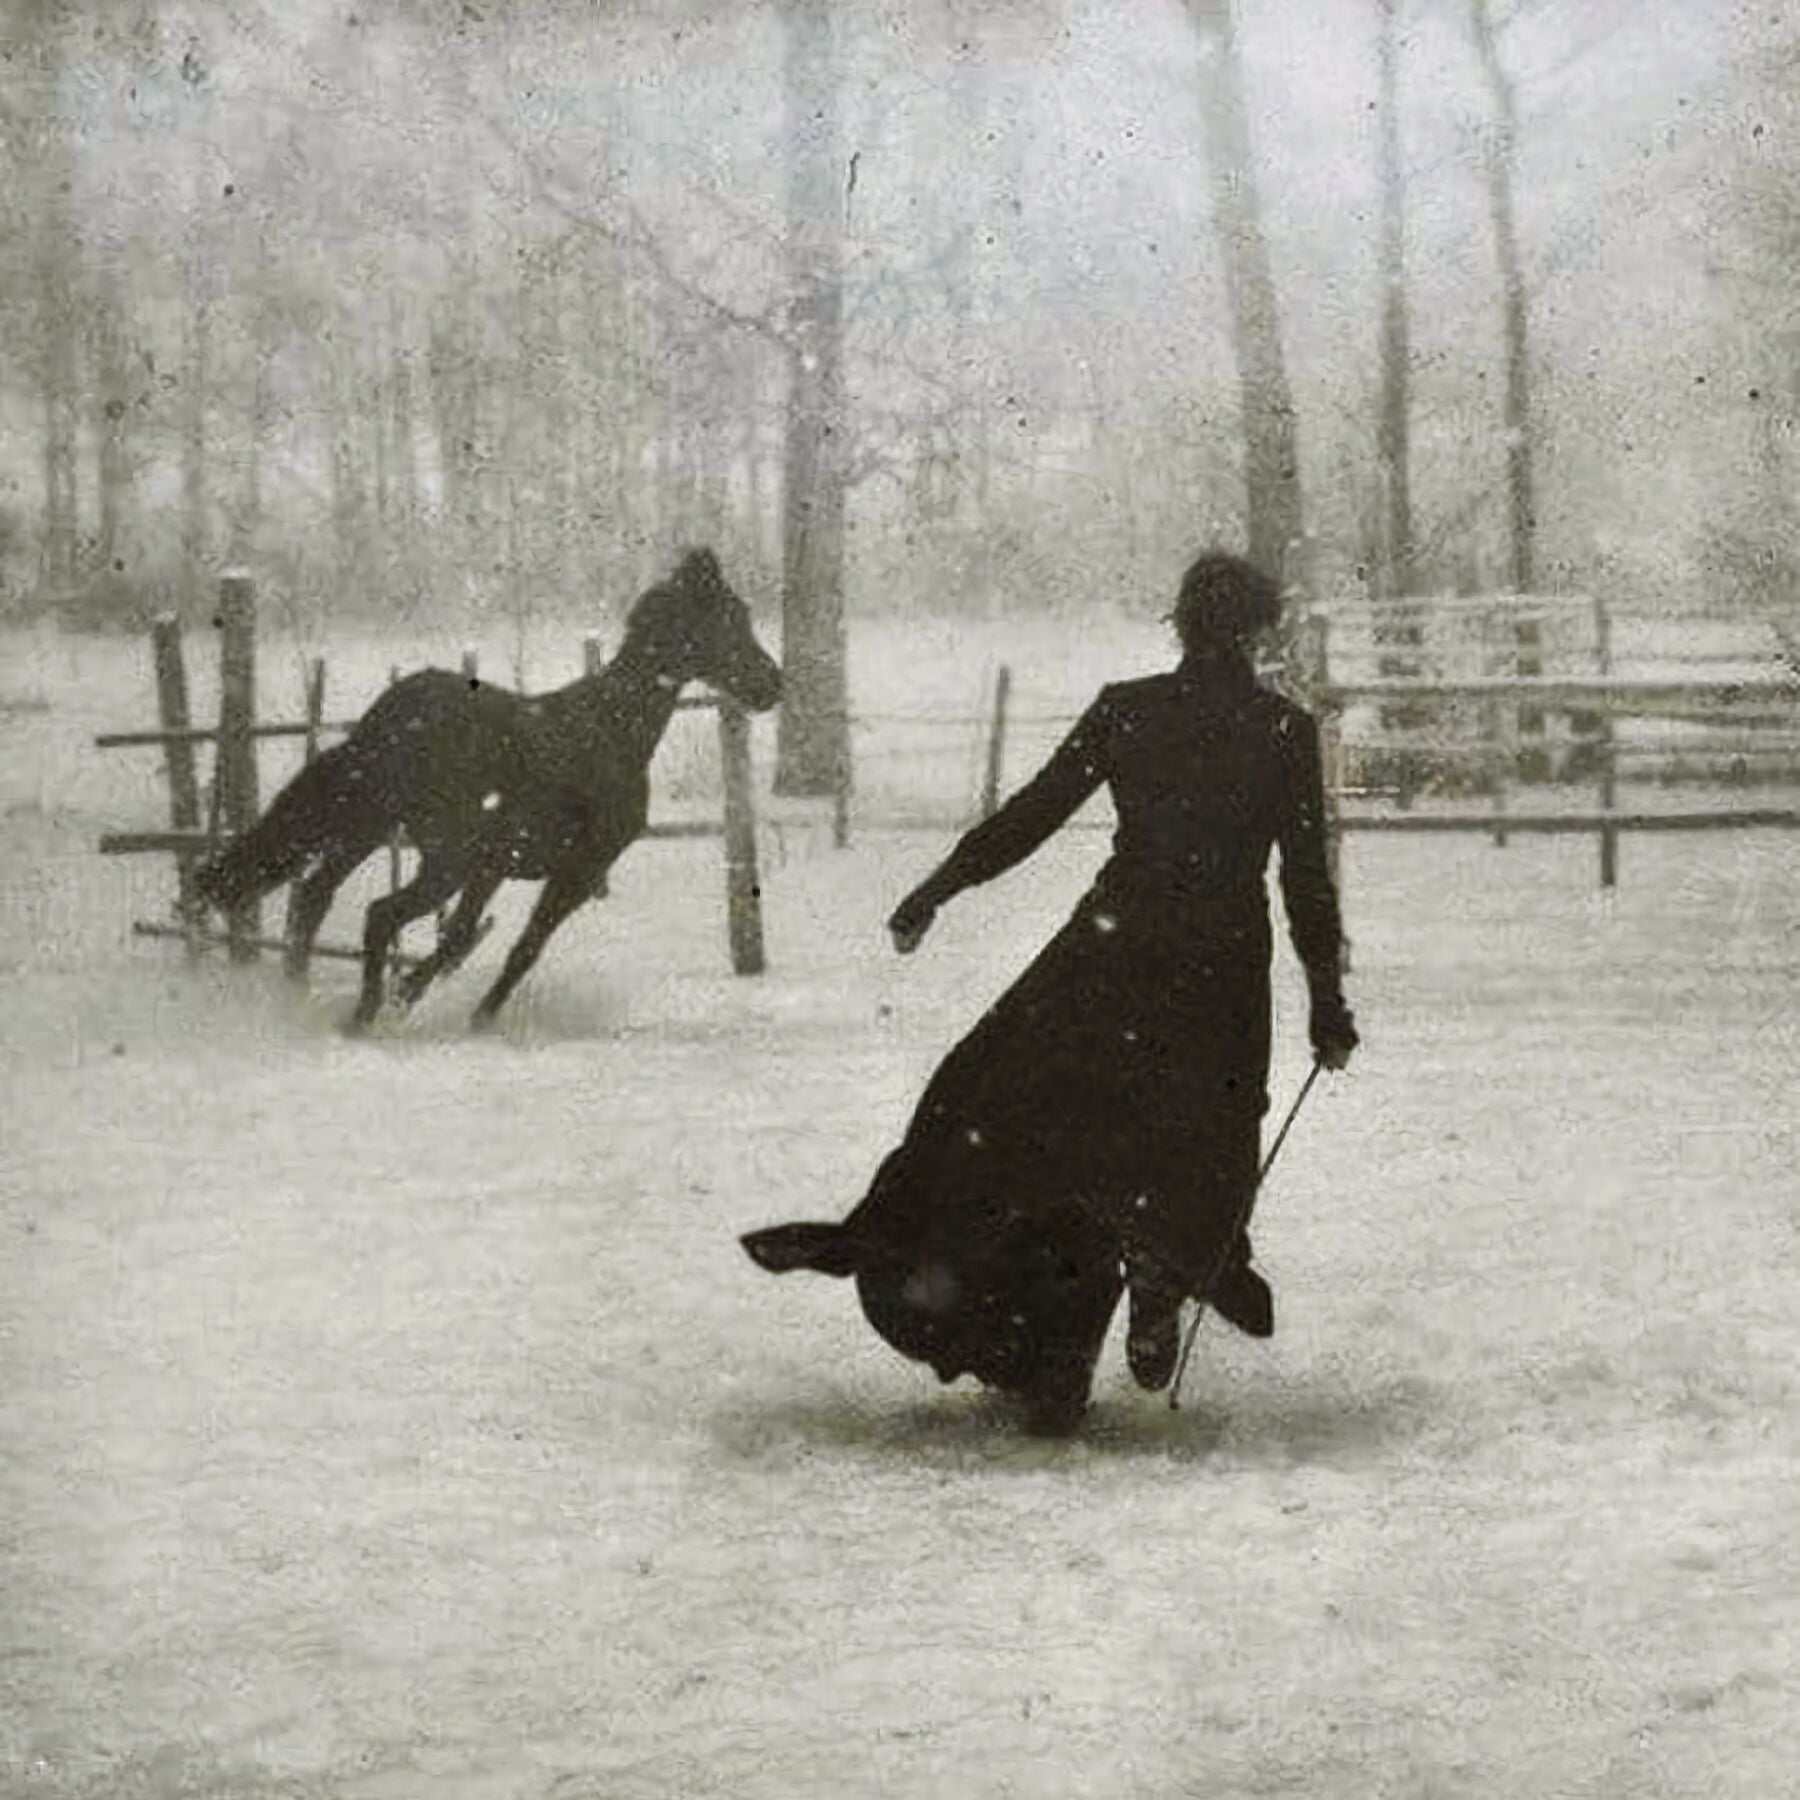 Lady and Her Horse on a Snowy Day by Félix Thiollierv- 1899 